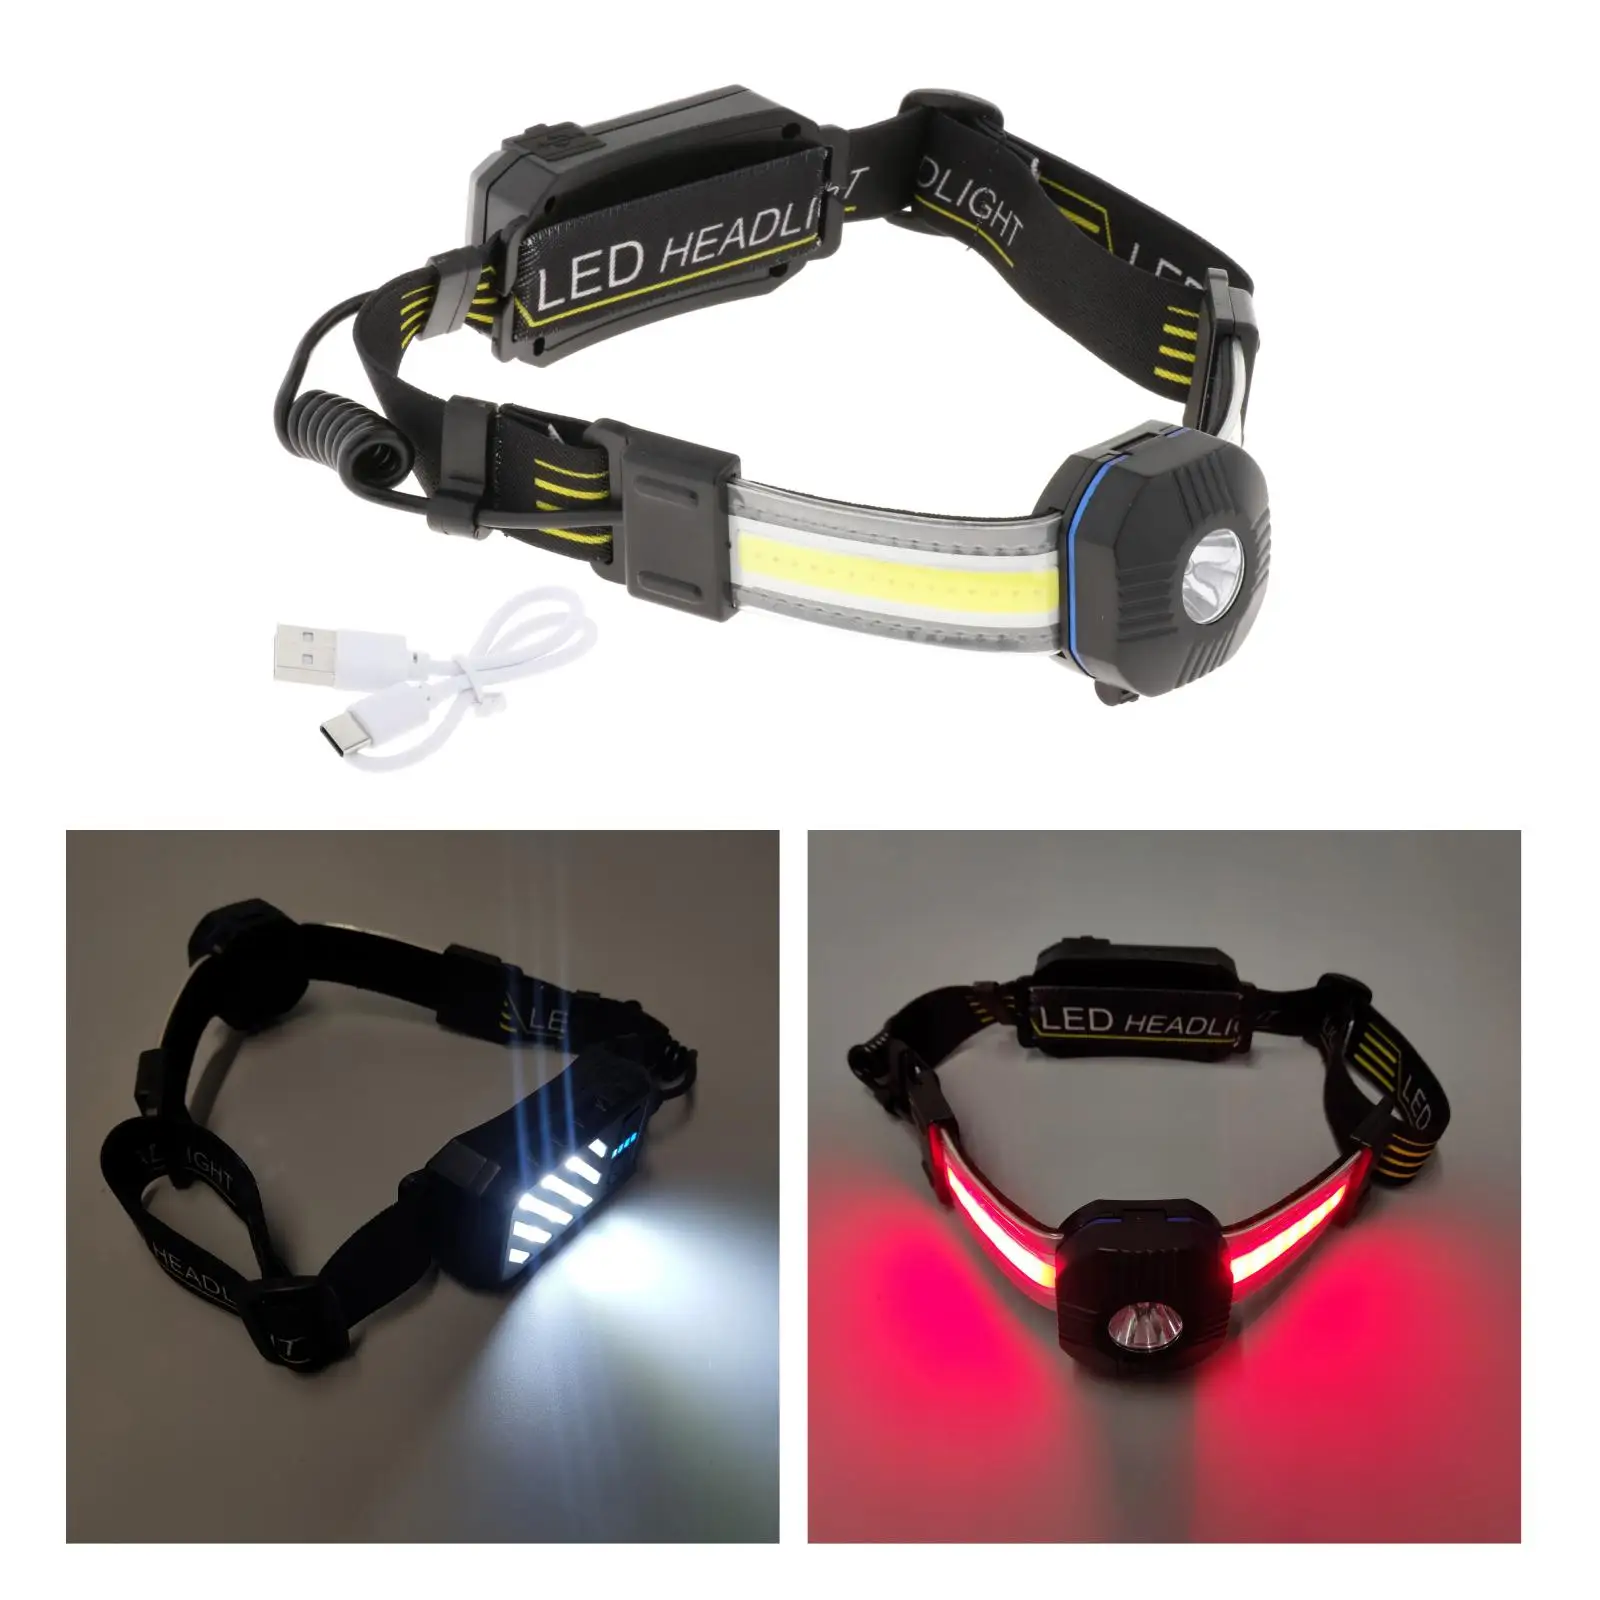 Rechargeable Headlight LED Head Torch, Waterproof Lightweight COB Headlamp Head Light for Running Cycling Camping Fishing Hiking